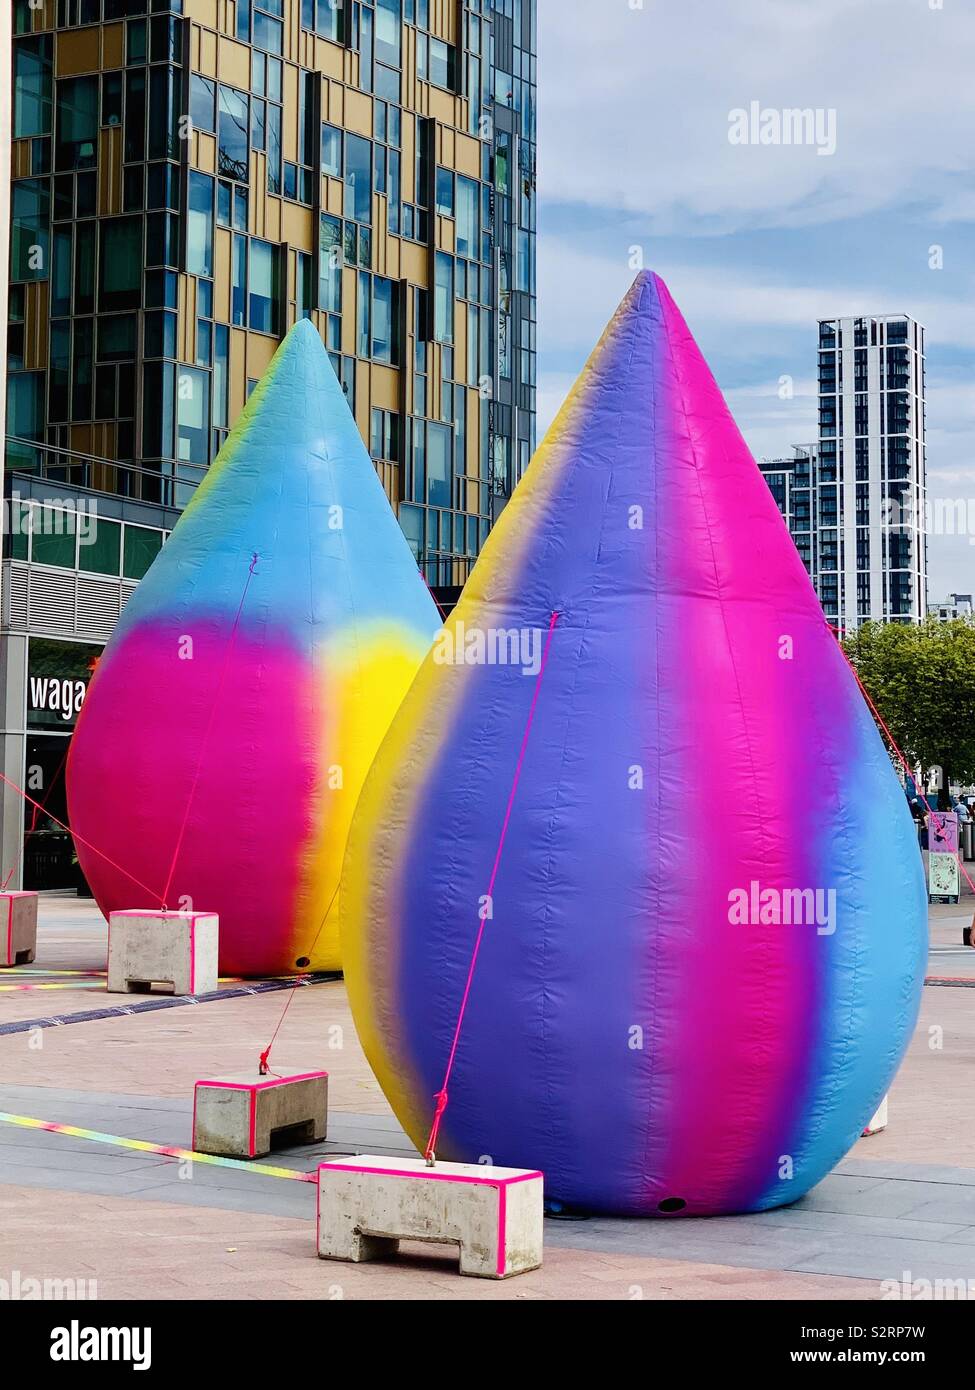 Greenwich, UK - 5 July 2019: Bright inflatable teardrop shaped art installation outside the 02 arena. Stock Photo